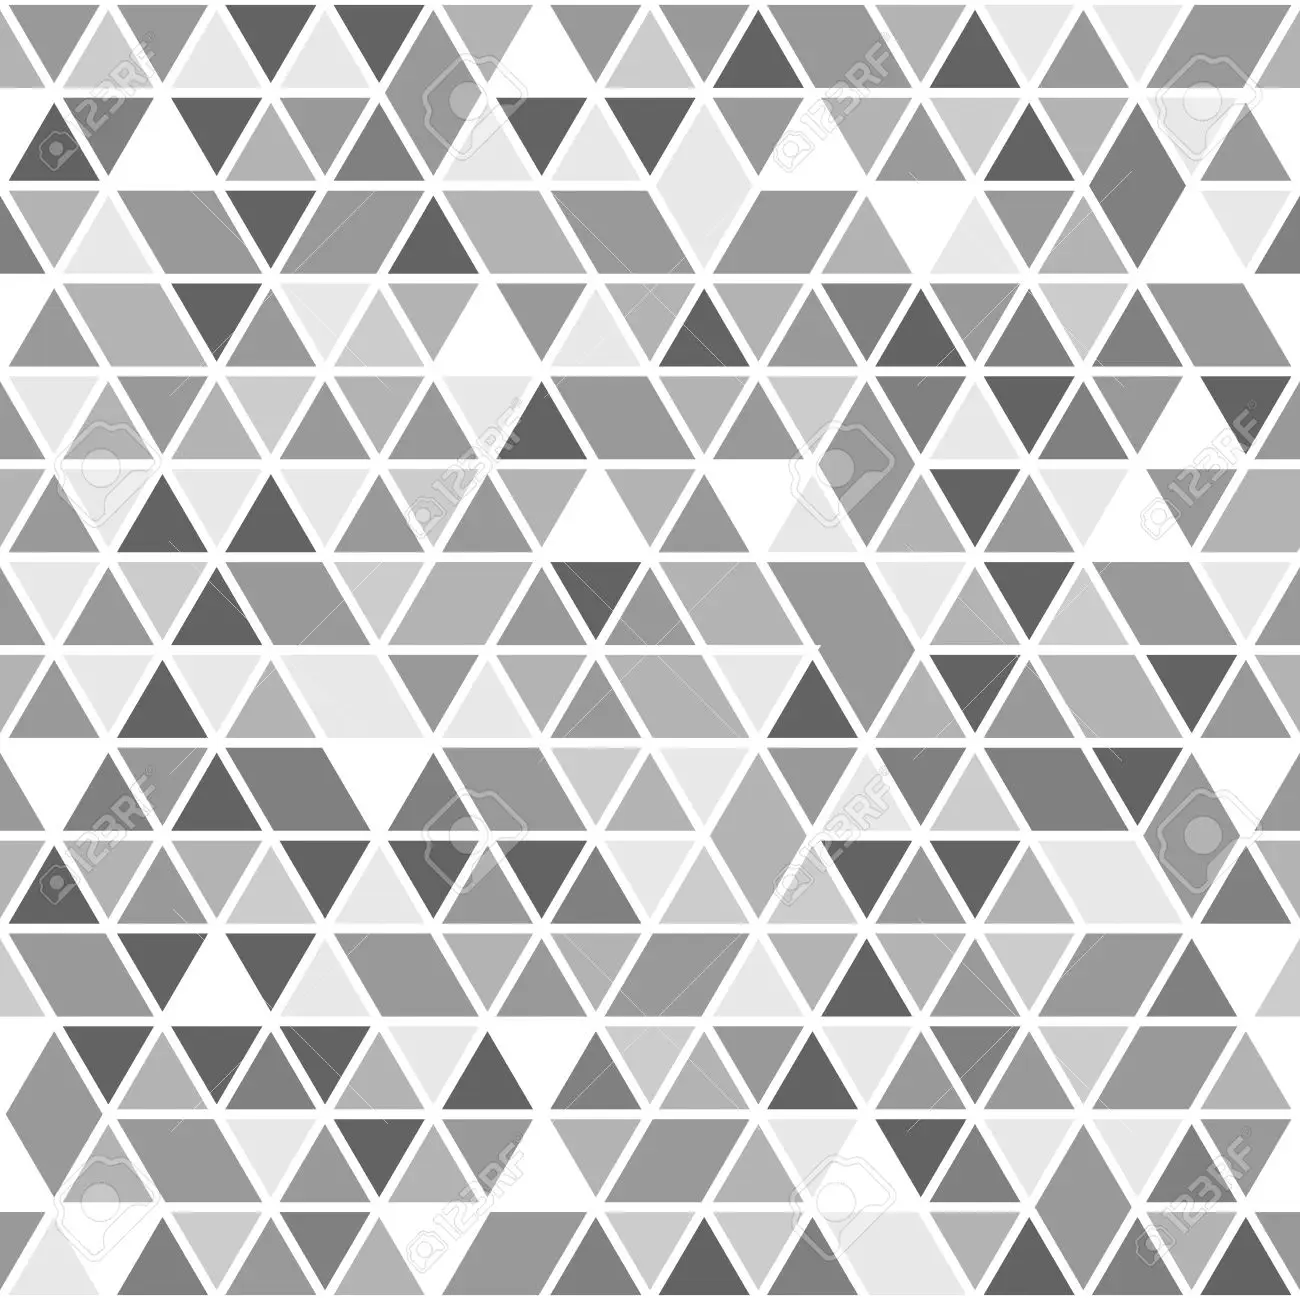 Geometric vector pattern with grey and white triangles seamless abstract texture for wallpapers and backgrounds royalty free svg cliparts vectors and stock illustration image